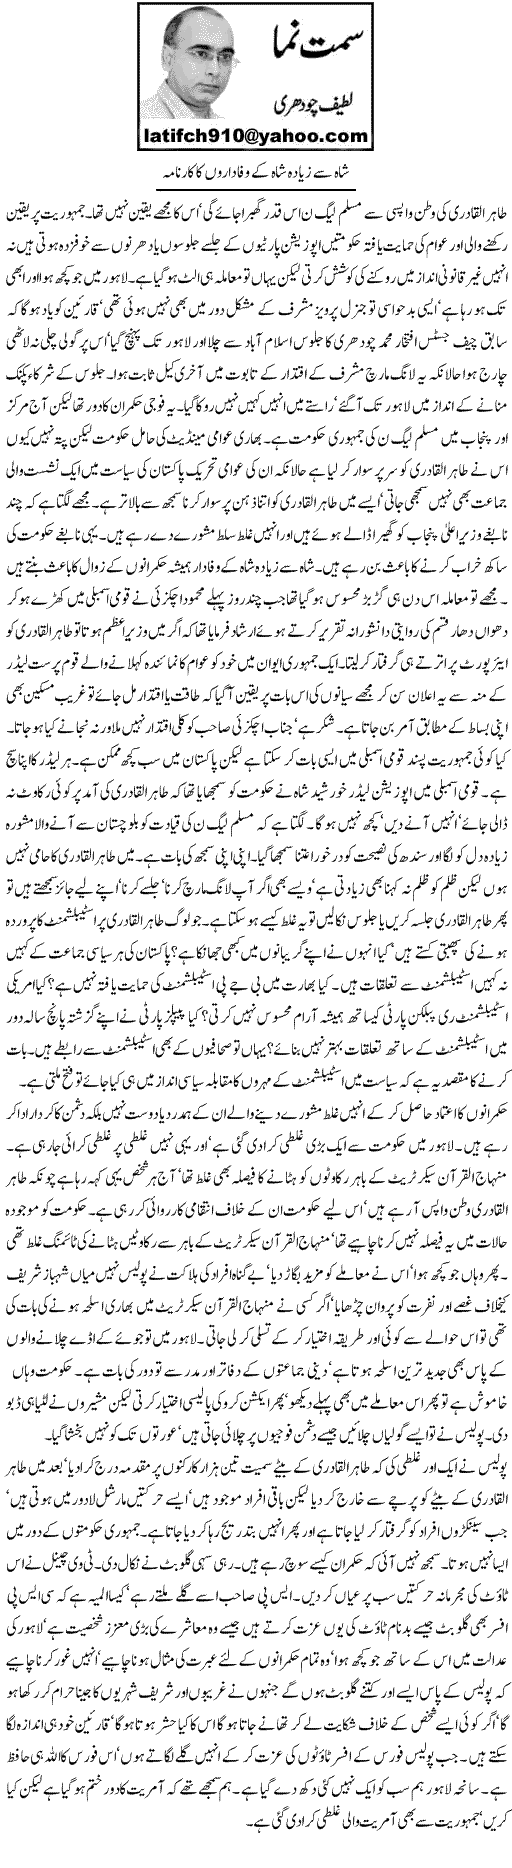 Print Media Coverage Daily Express - Latif Ch